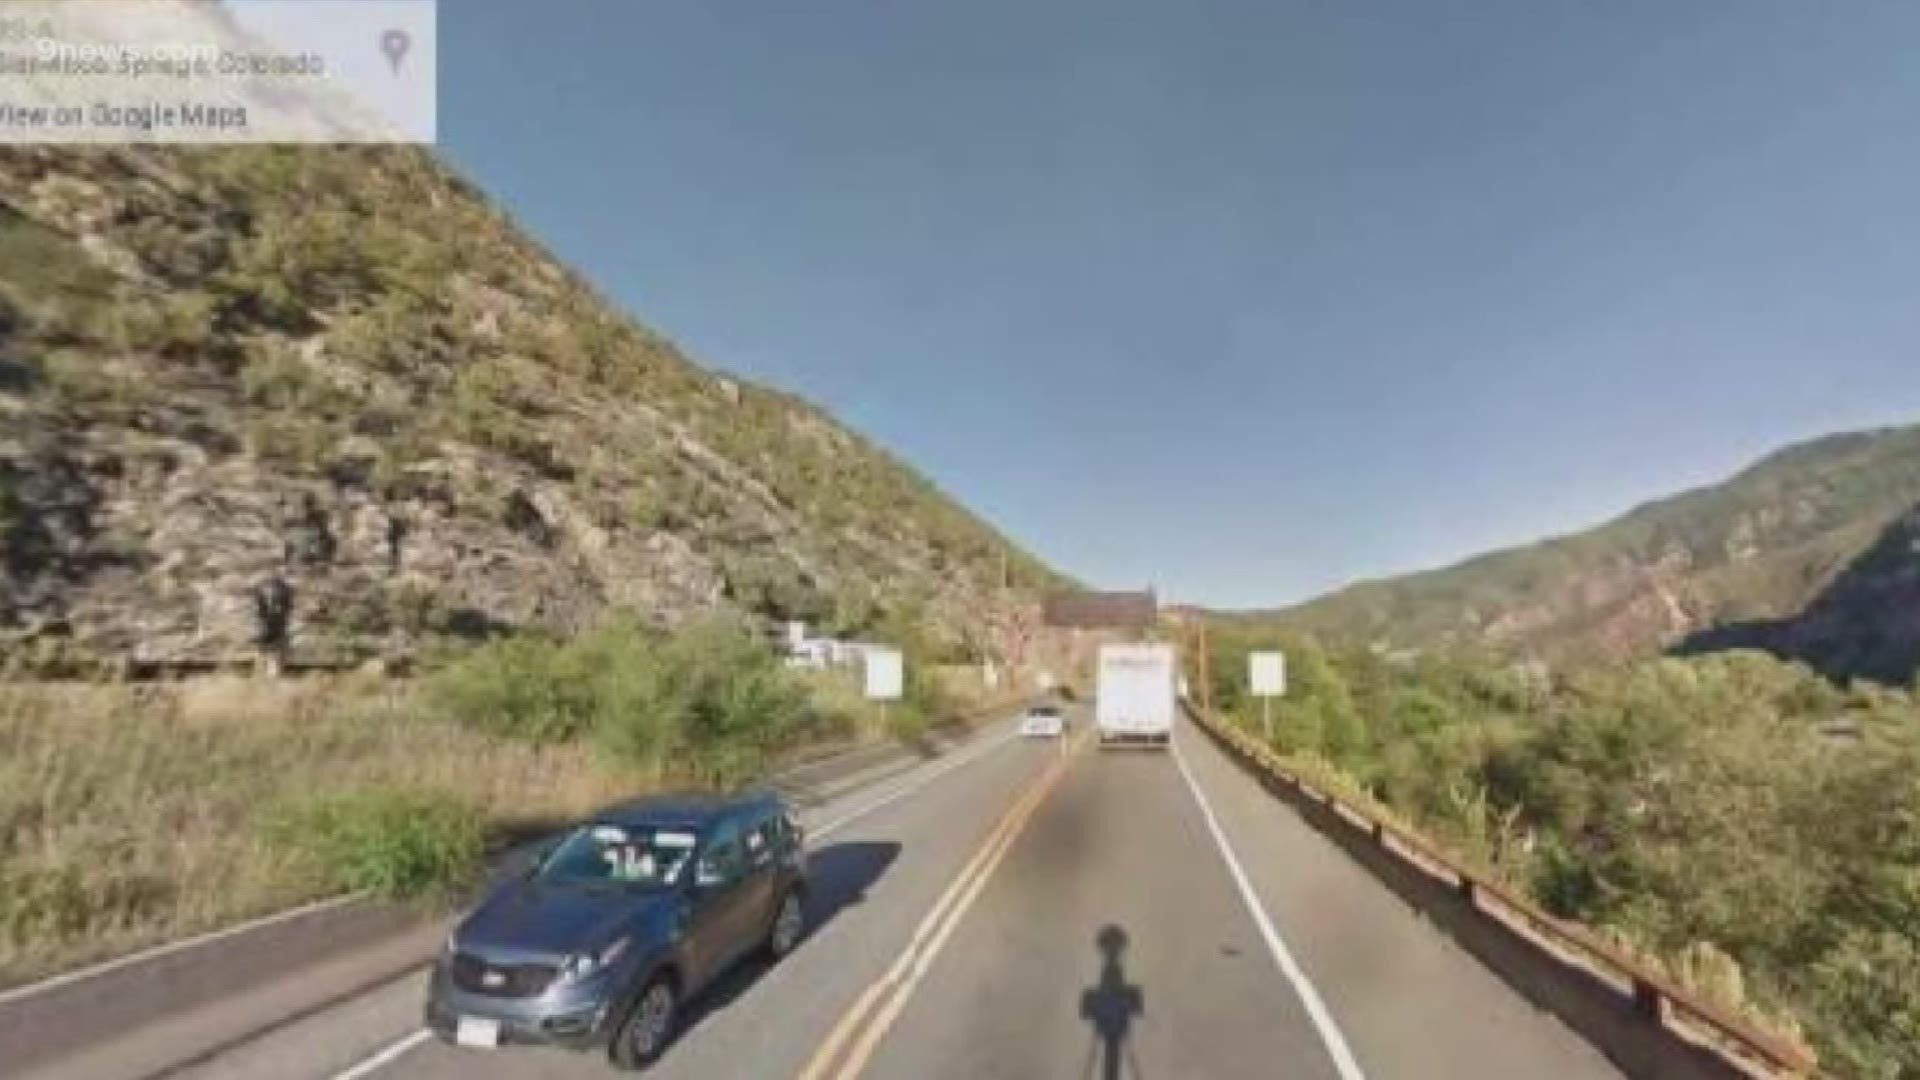 Colorado transportation officials have announced plans to install new technology along Interstate 70 that would increase the speed limit through Glenwood Canyon.